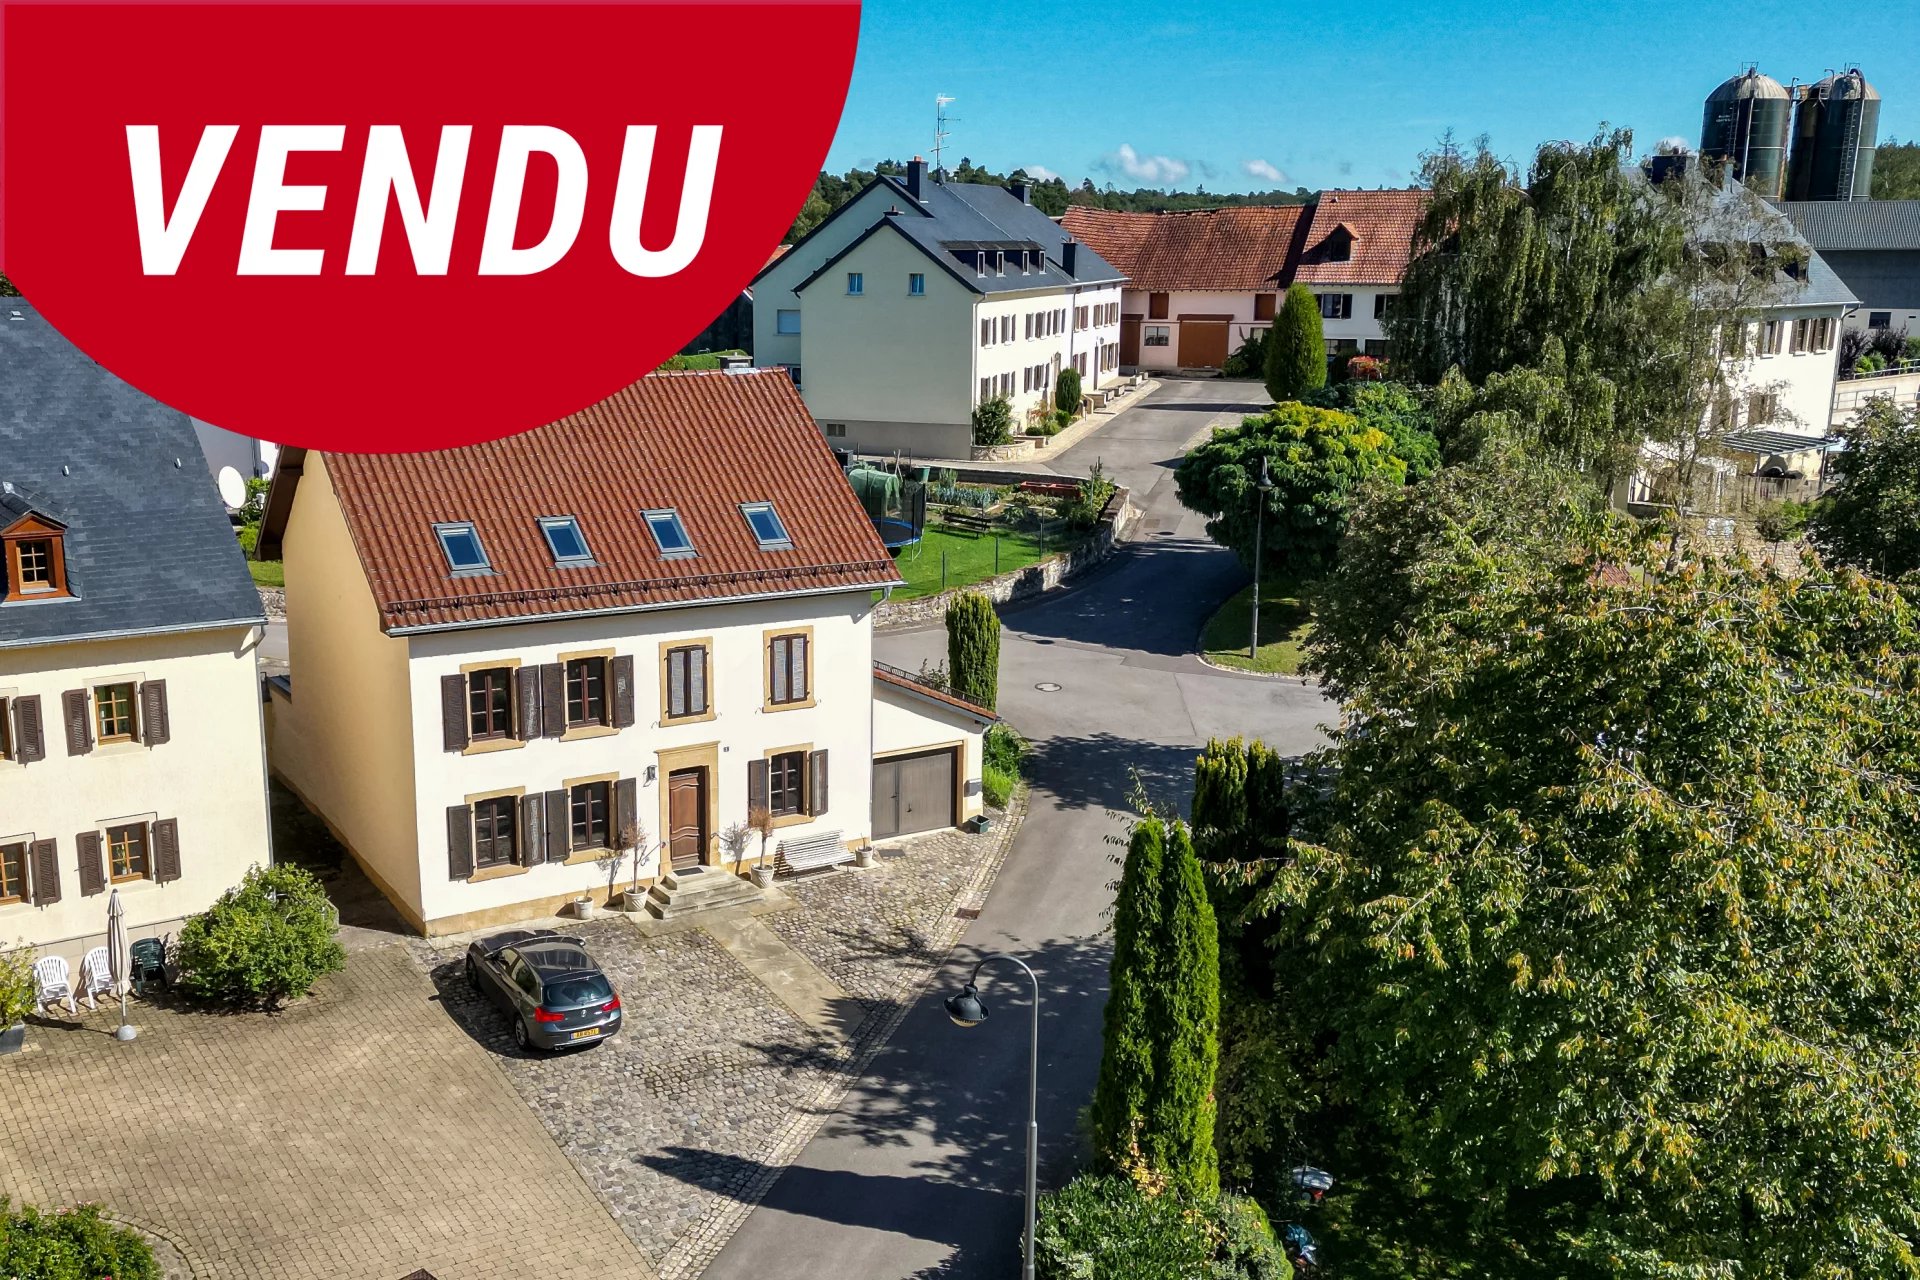 SOLD - Detached house with 4 bedrooms in Geyershaff